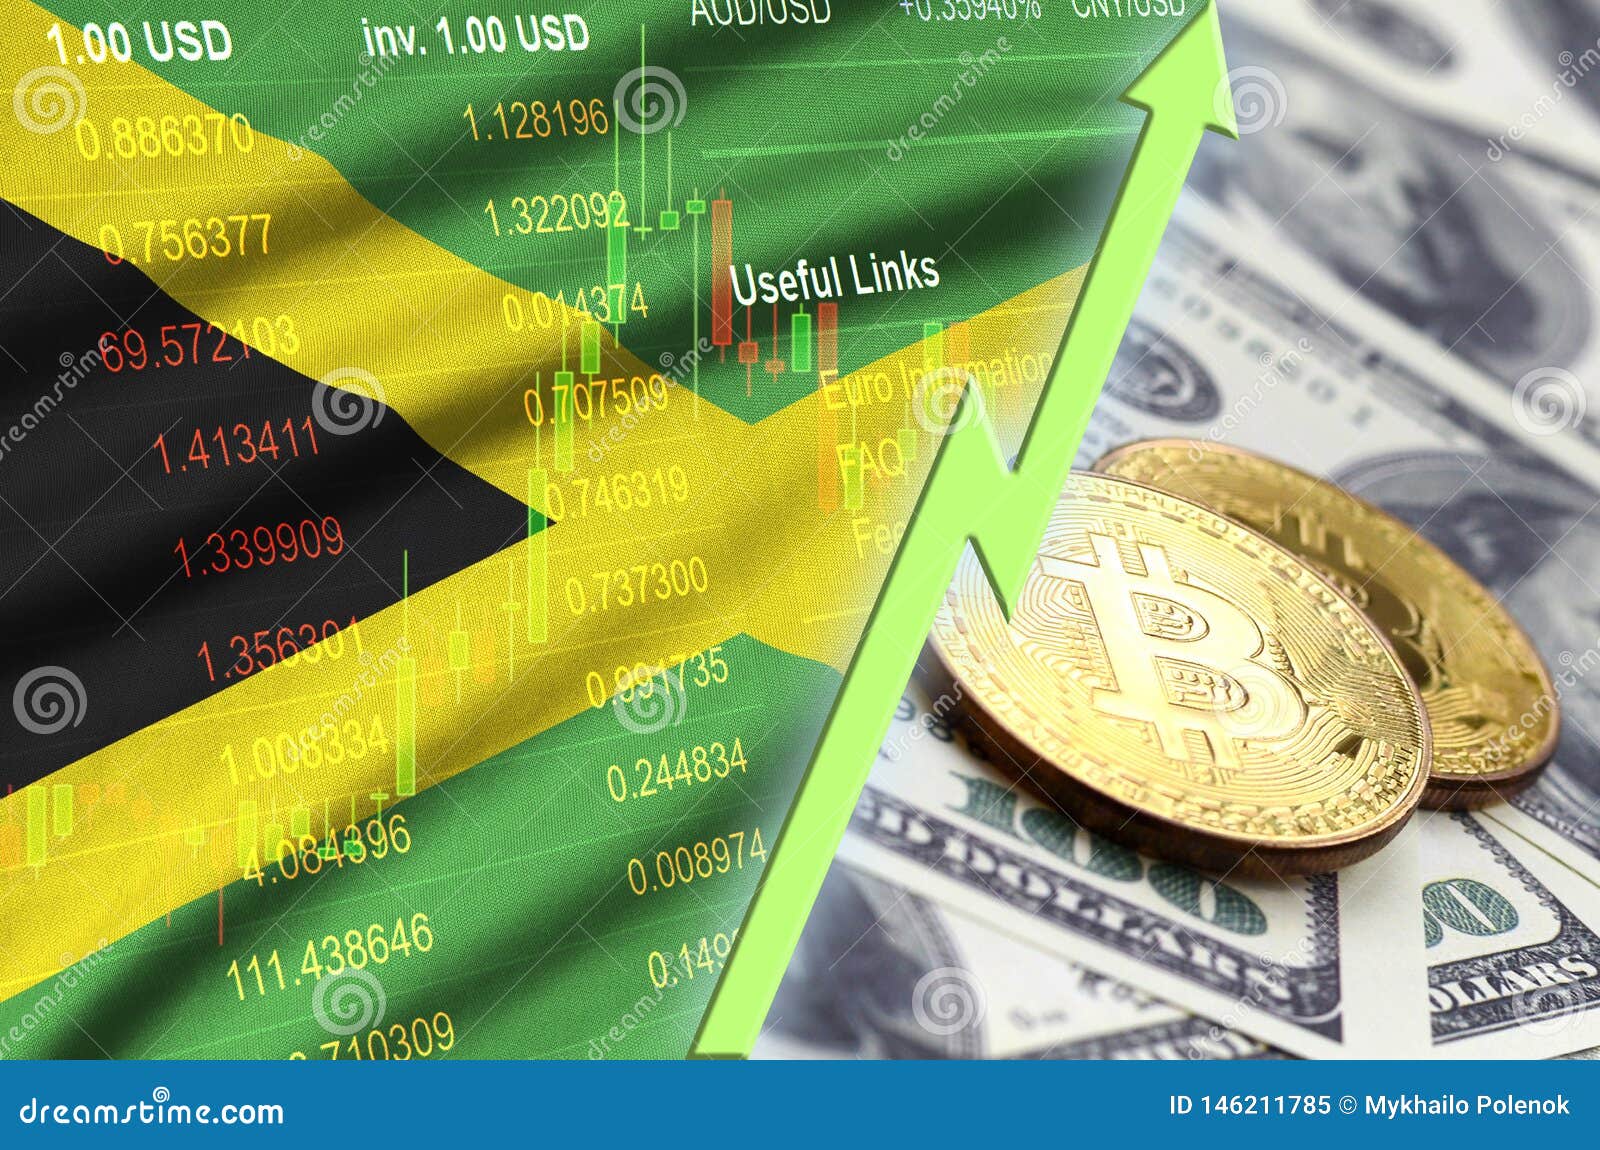 Where To Buy Bitcoin In Jamaica : WHERE CAN YOU BUY ...